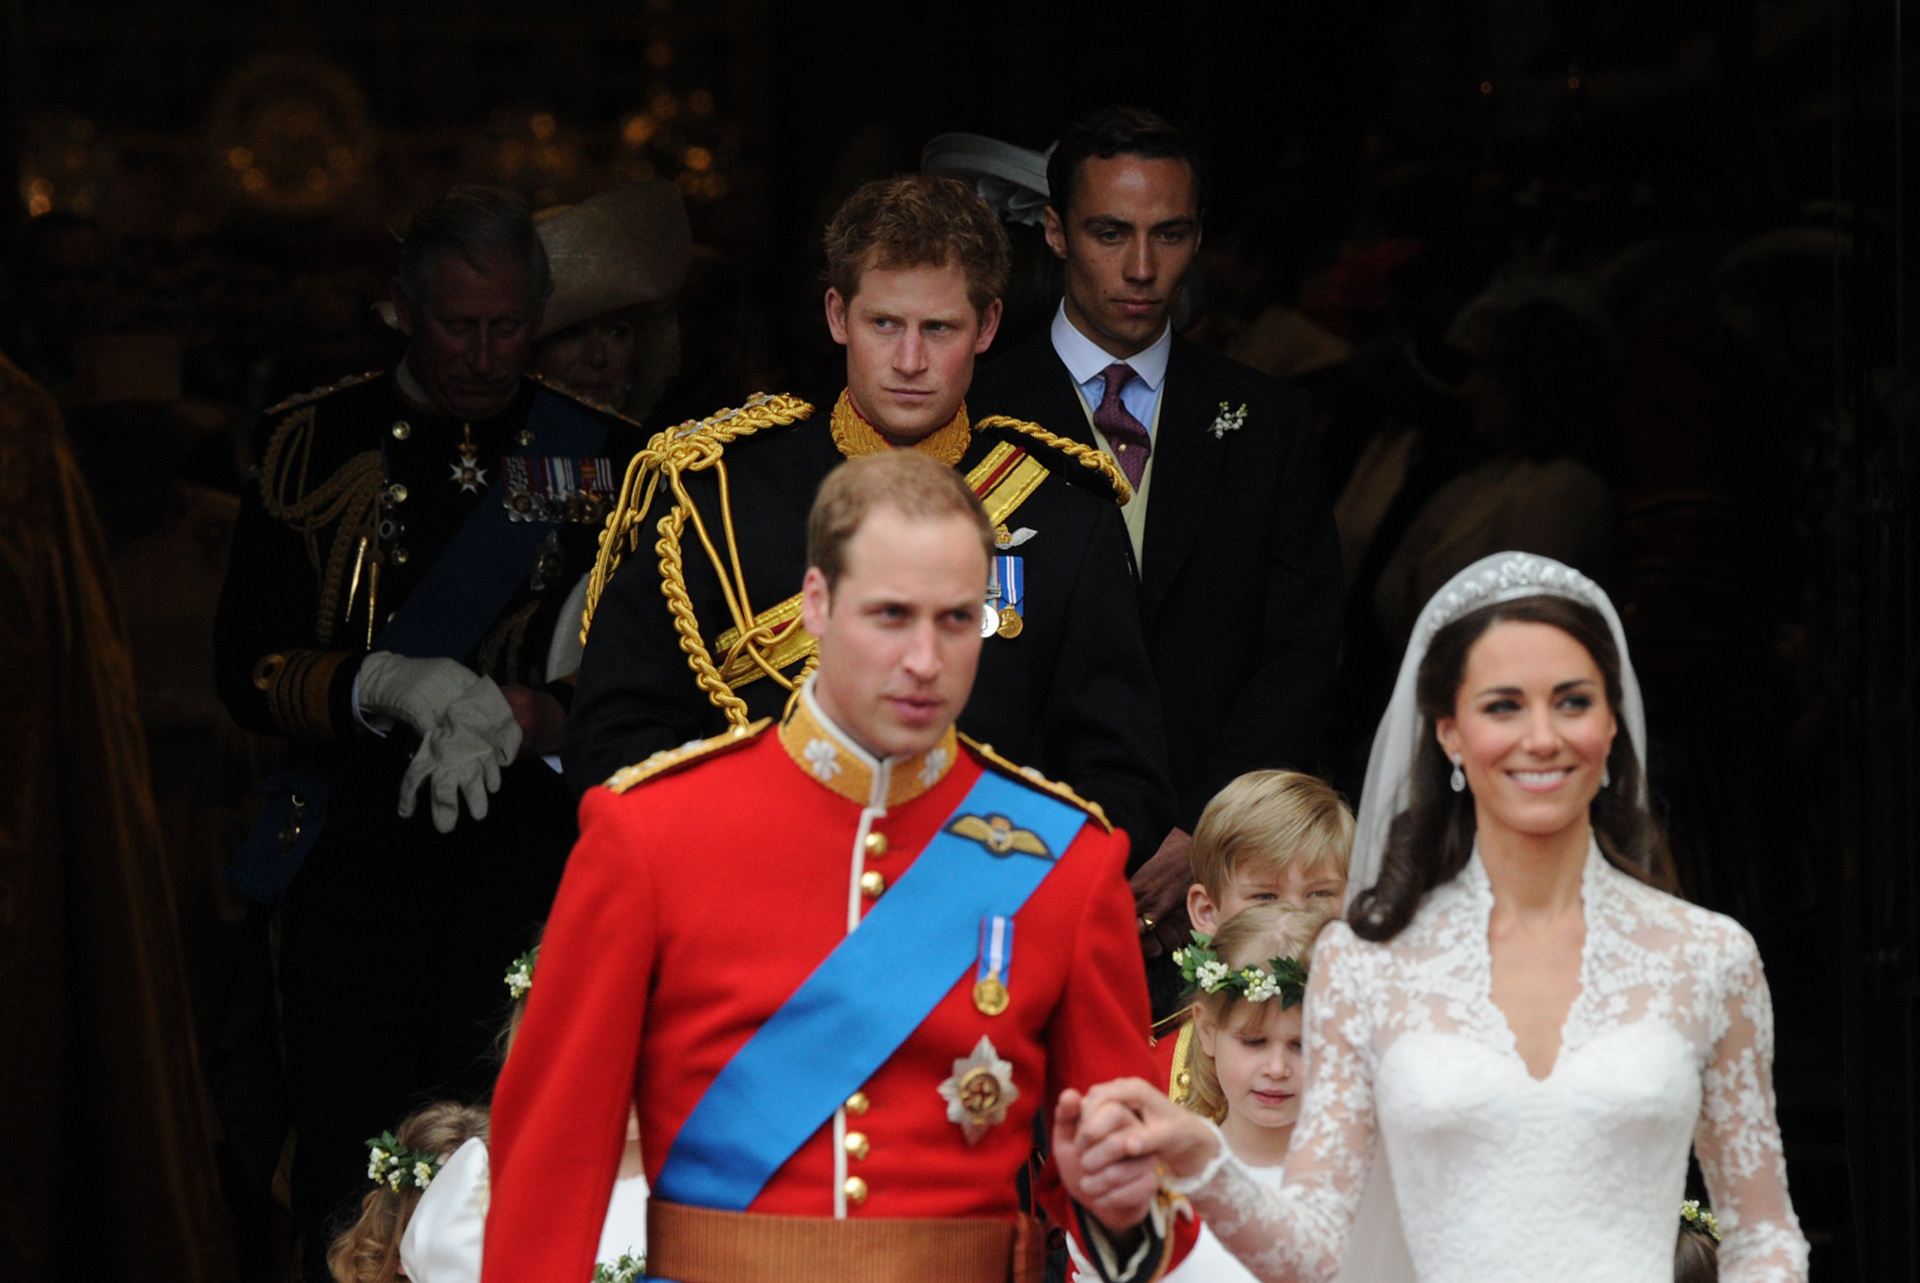 Britain's Prince Harry (background C) leaves Westminster Abbey in London, following the wedding ceremony of his brother Prince William (Front L) and Kate, (Front R) Duchess of Cambridge, April 29, 2011. AFP PHOTO / CARL DE SOUZA ( Image credit should read CARL DE SOUZA/AFP via Getty Images)